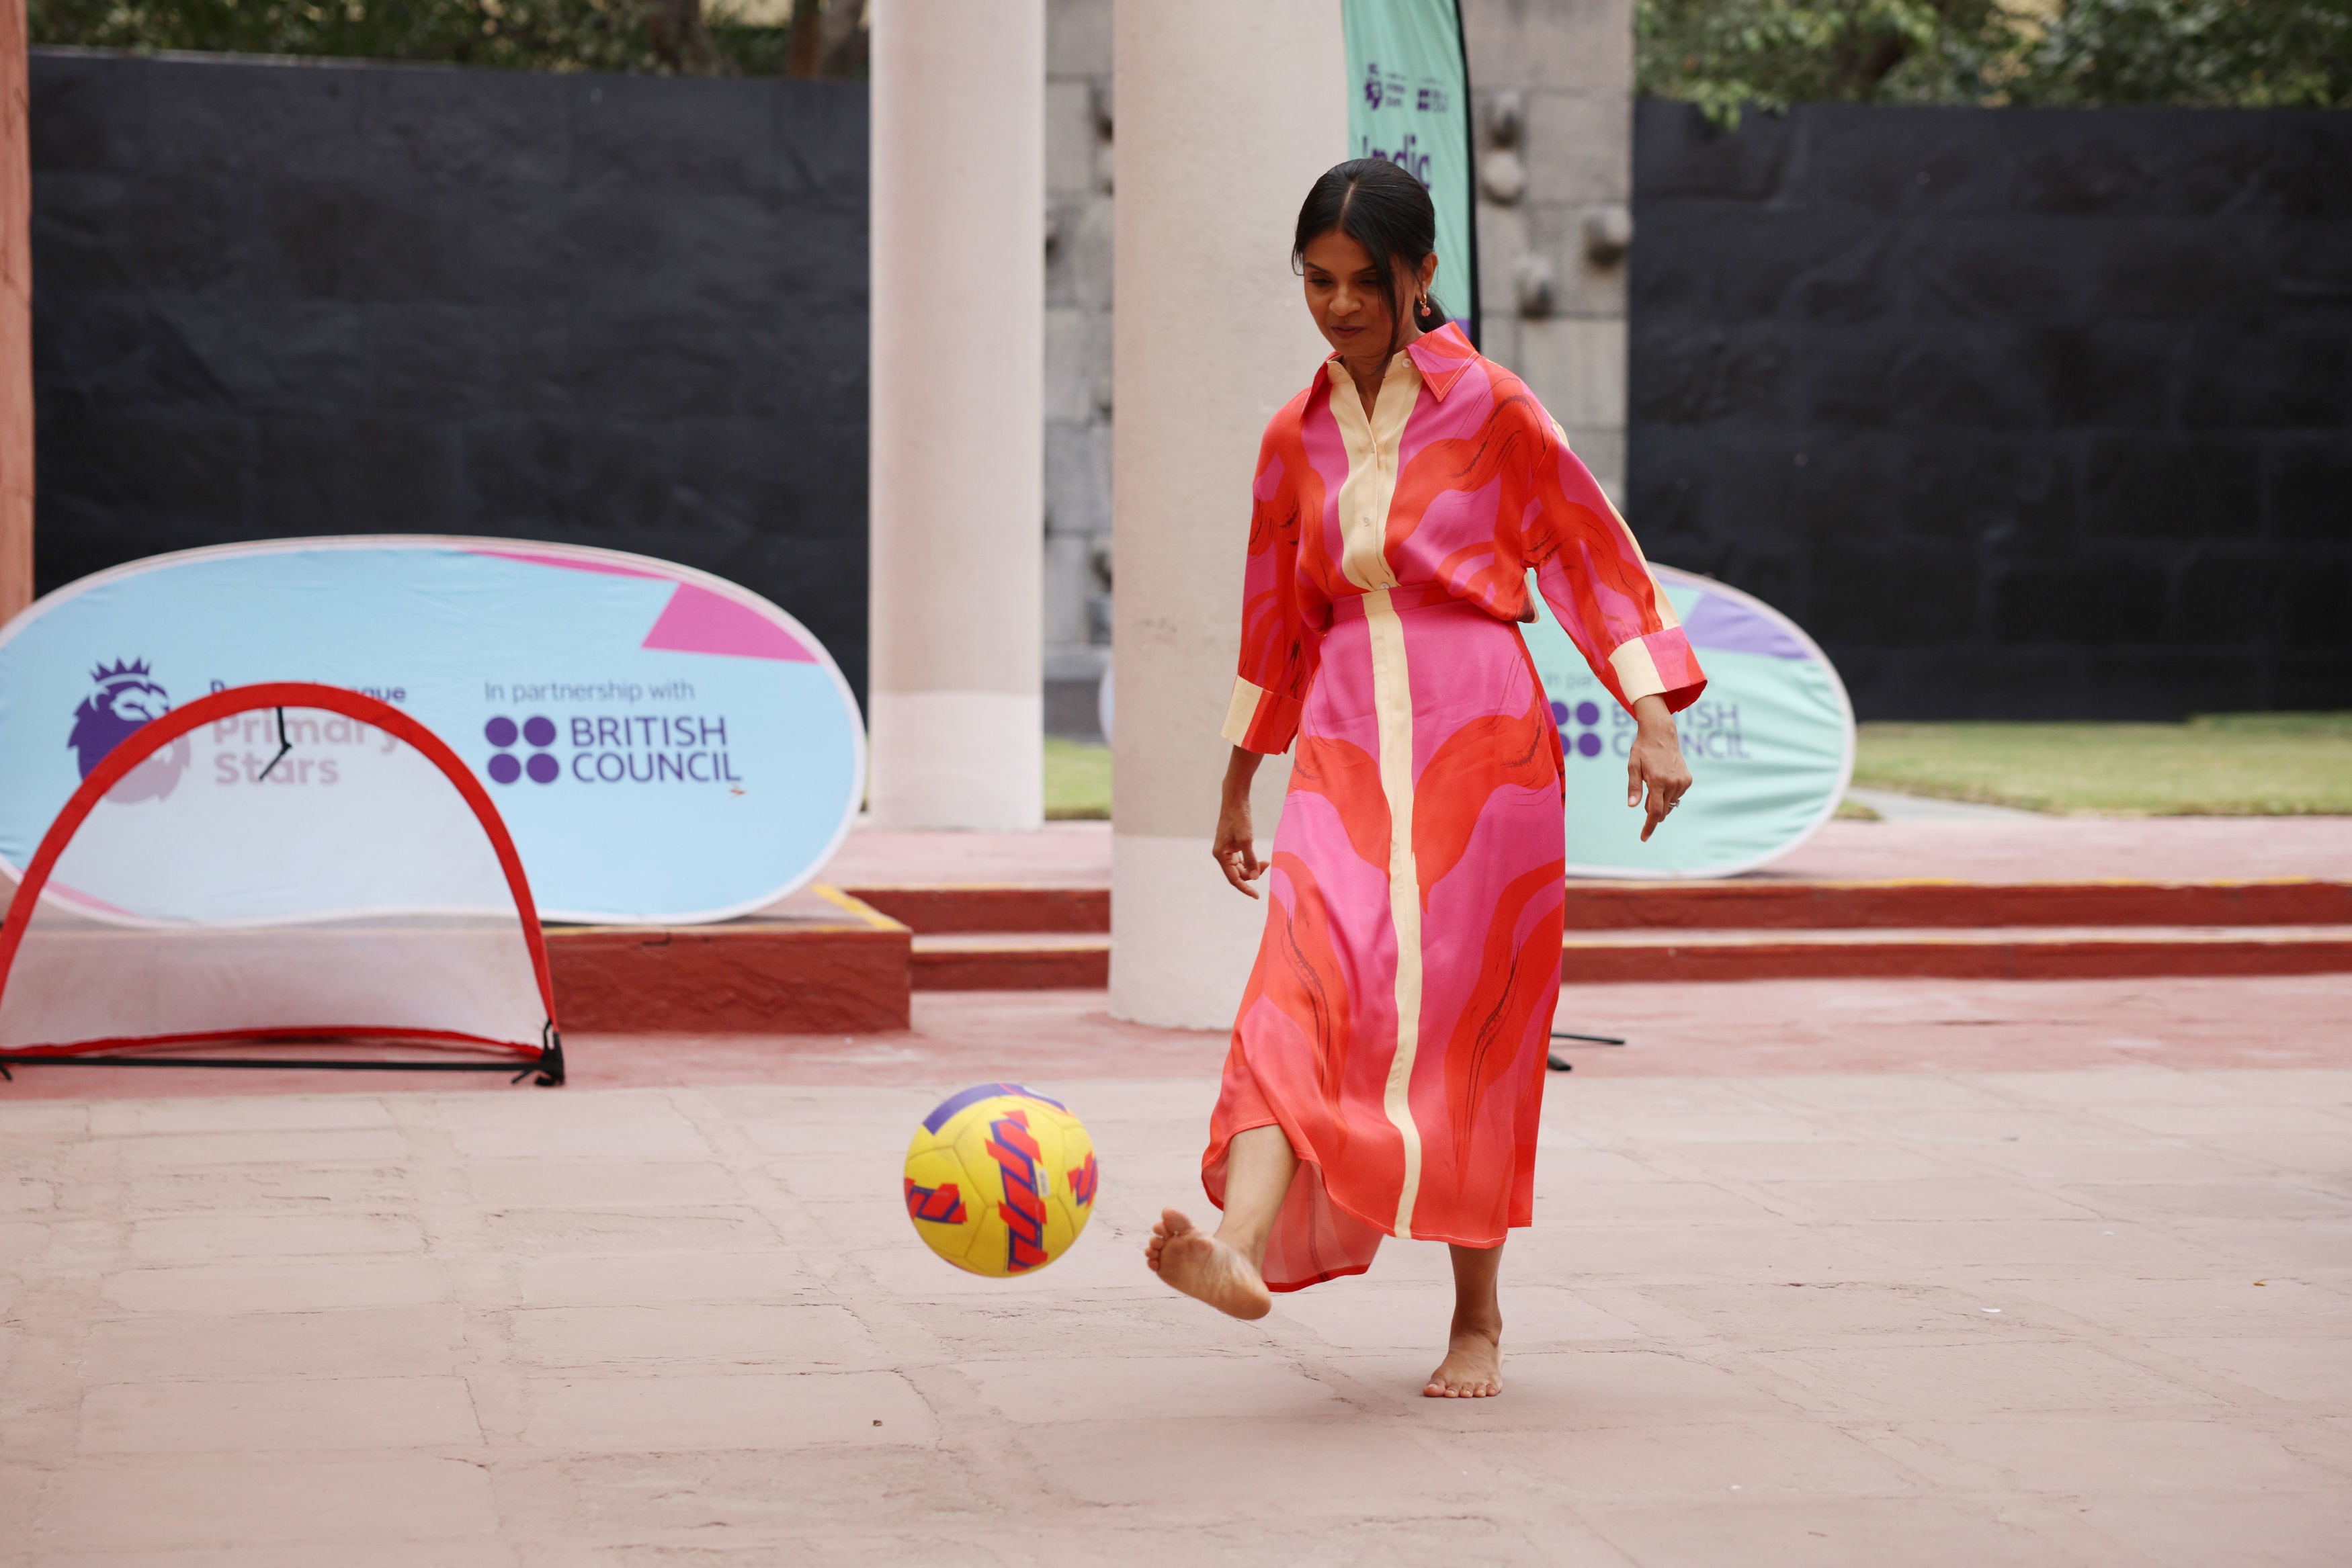 Prime Minister Rishi Sunak’s wife Akshata Murty plays football with local schoolchildren at the British Council during an official visit ahead of the G20 Summit in New Delhi